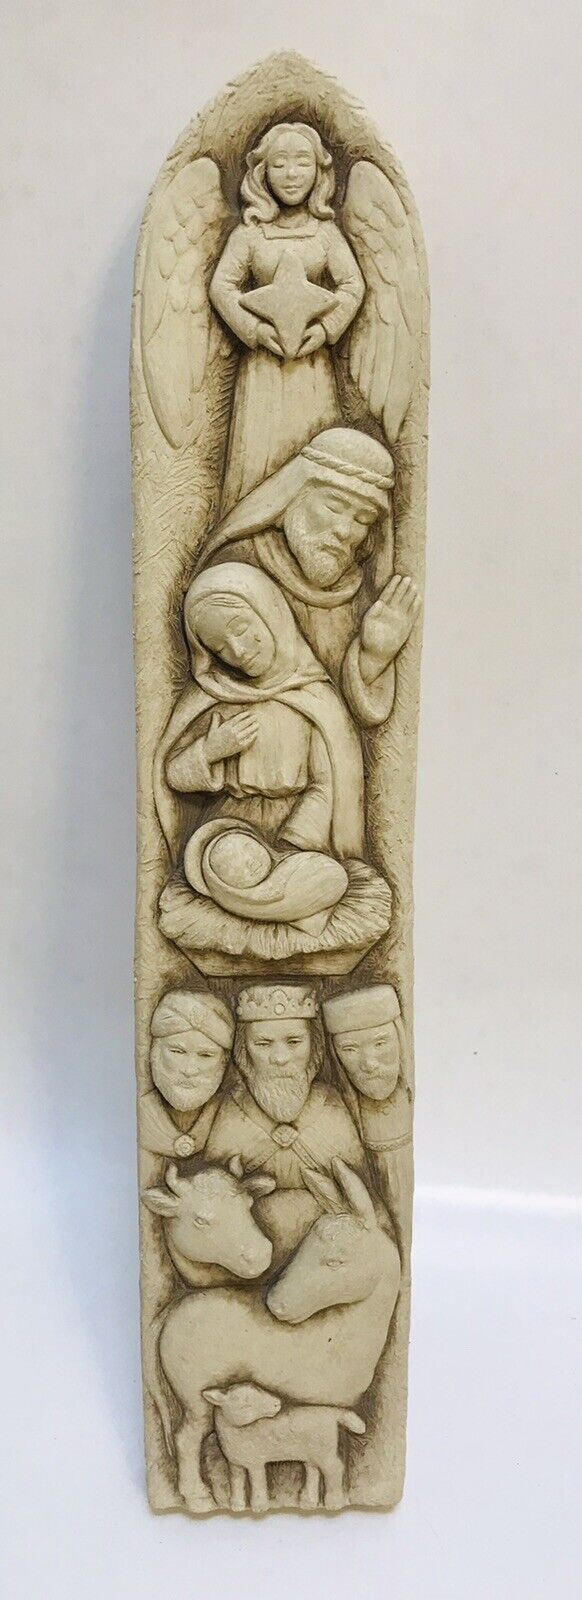 Carruth Studio Plaque Nativity Sculpture Handcrafted In Stone Wall Art 2014